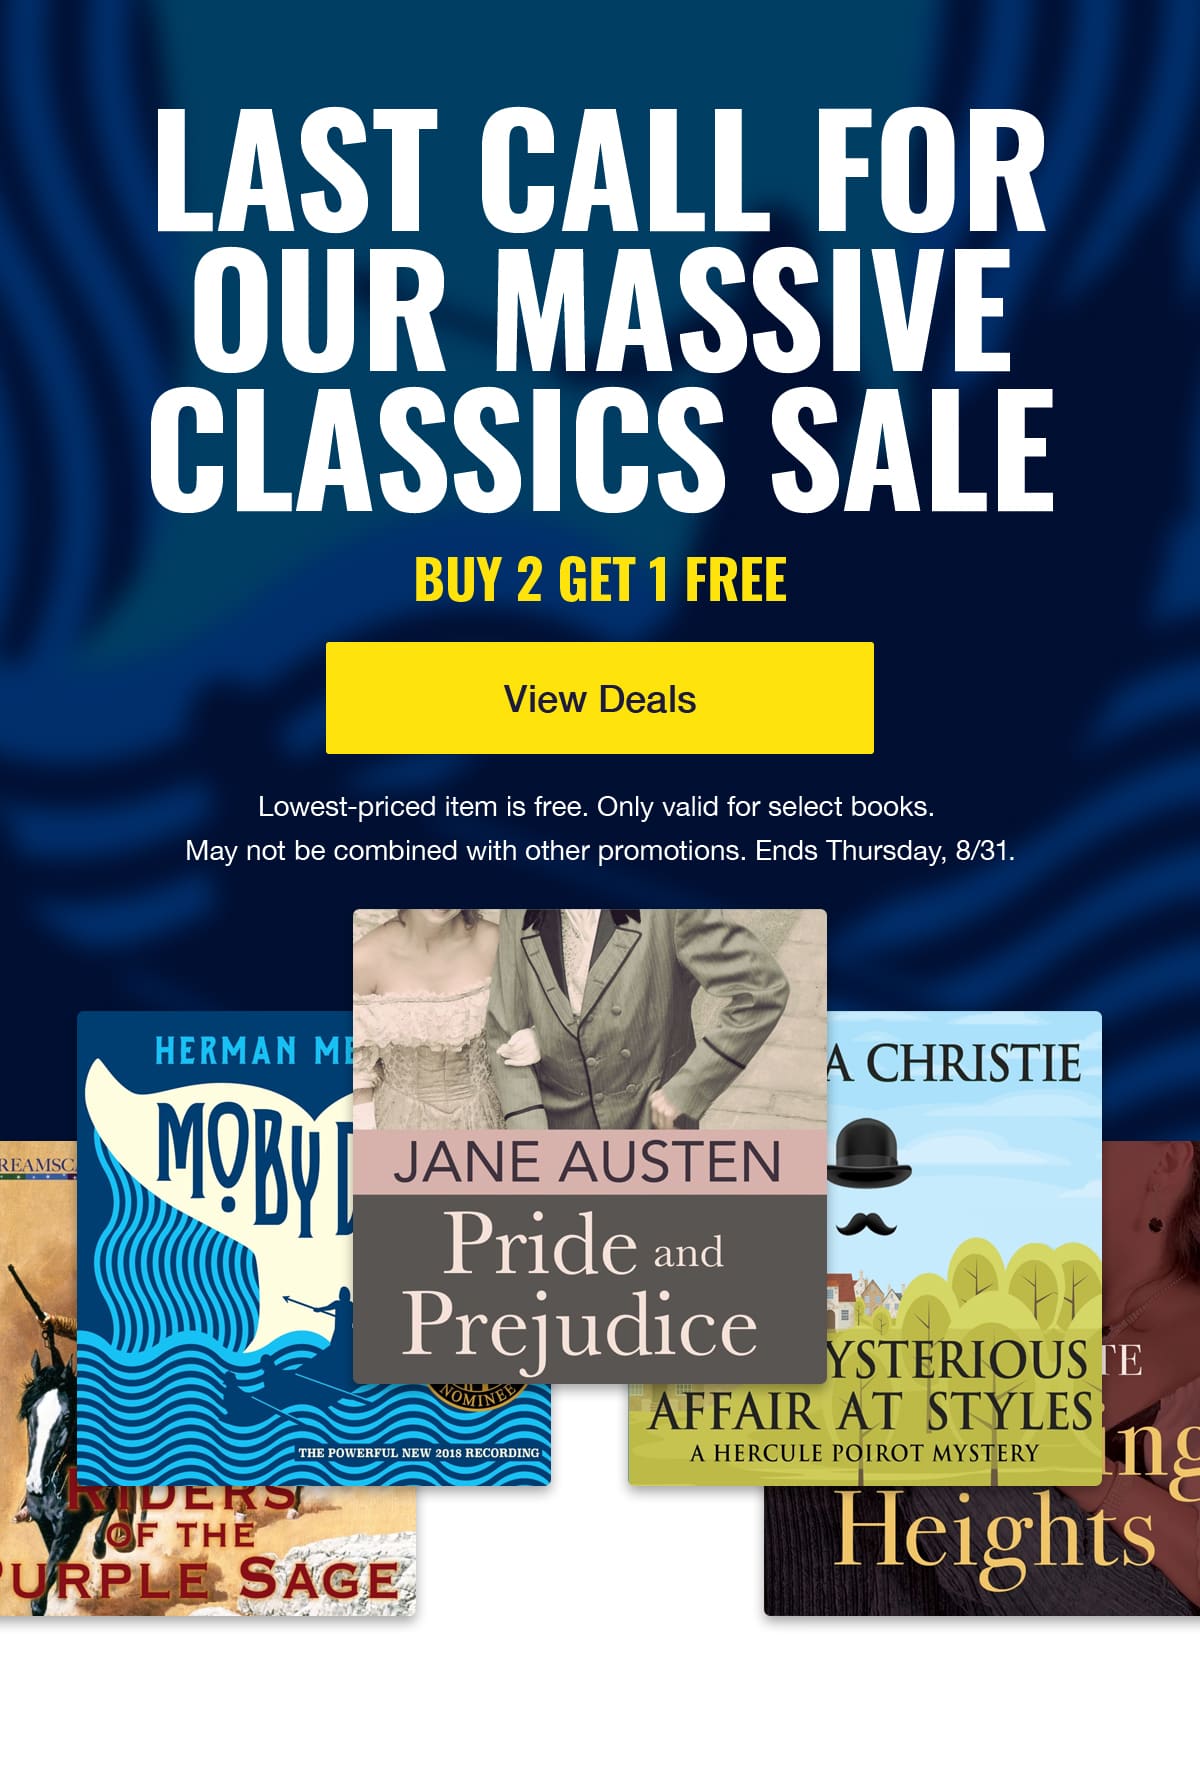 LAST CALL FOR OUR MASSIVE CLASSICS SALE: Buy 2 Get 1 Free